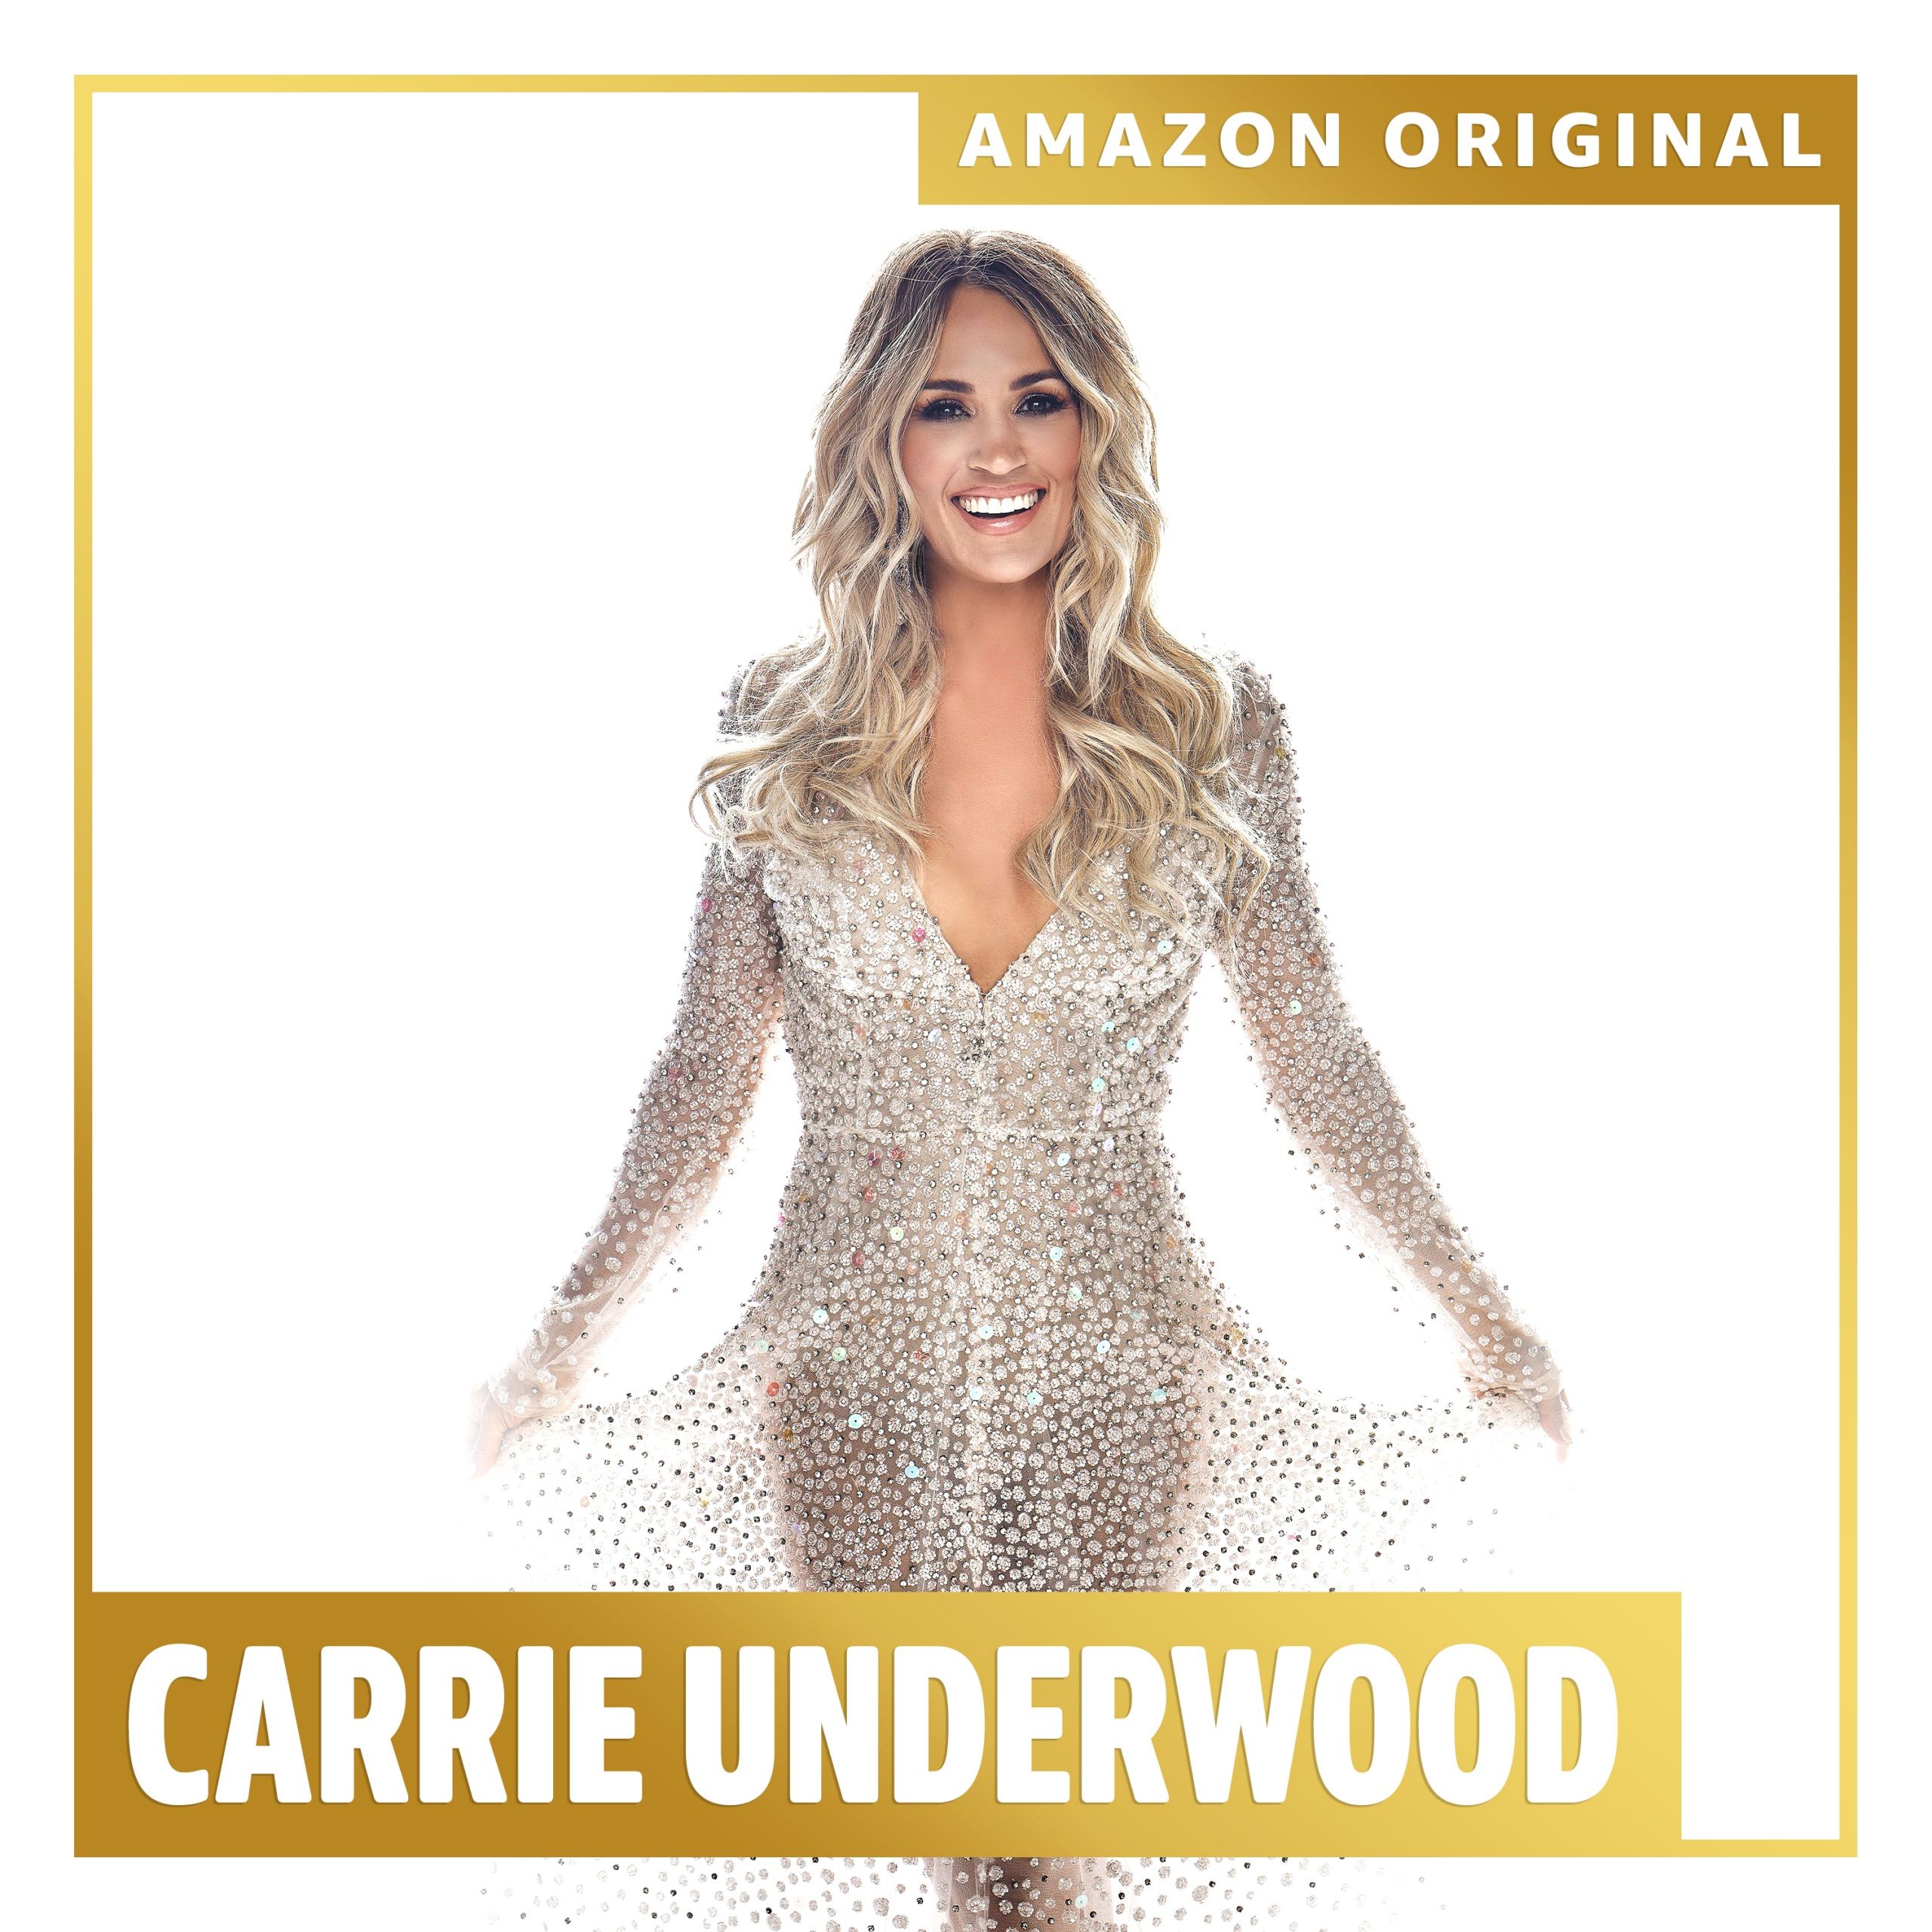 CARRIE UNDERWOOD RELEASES ORIGINAL HOLIDAY SONG “FAVORITE TIME OF YEAR” EXCLUSIVELY ON AMAZON MUSIC